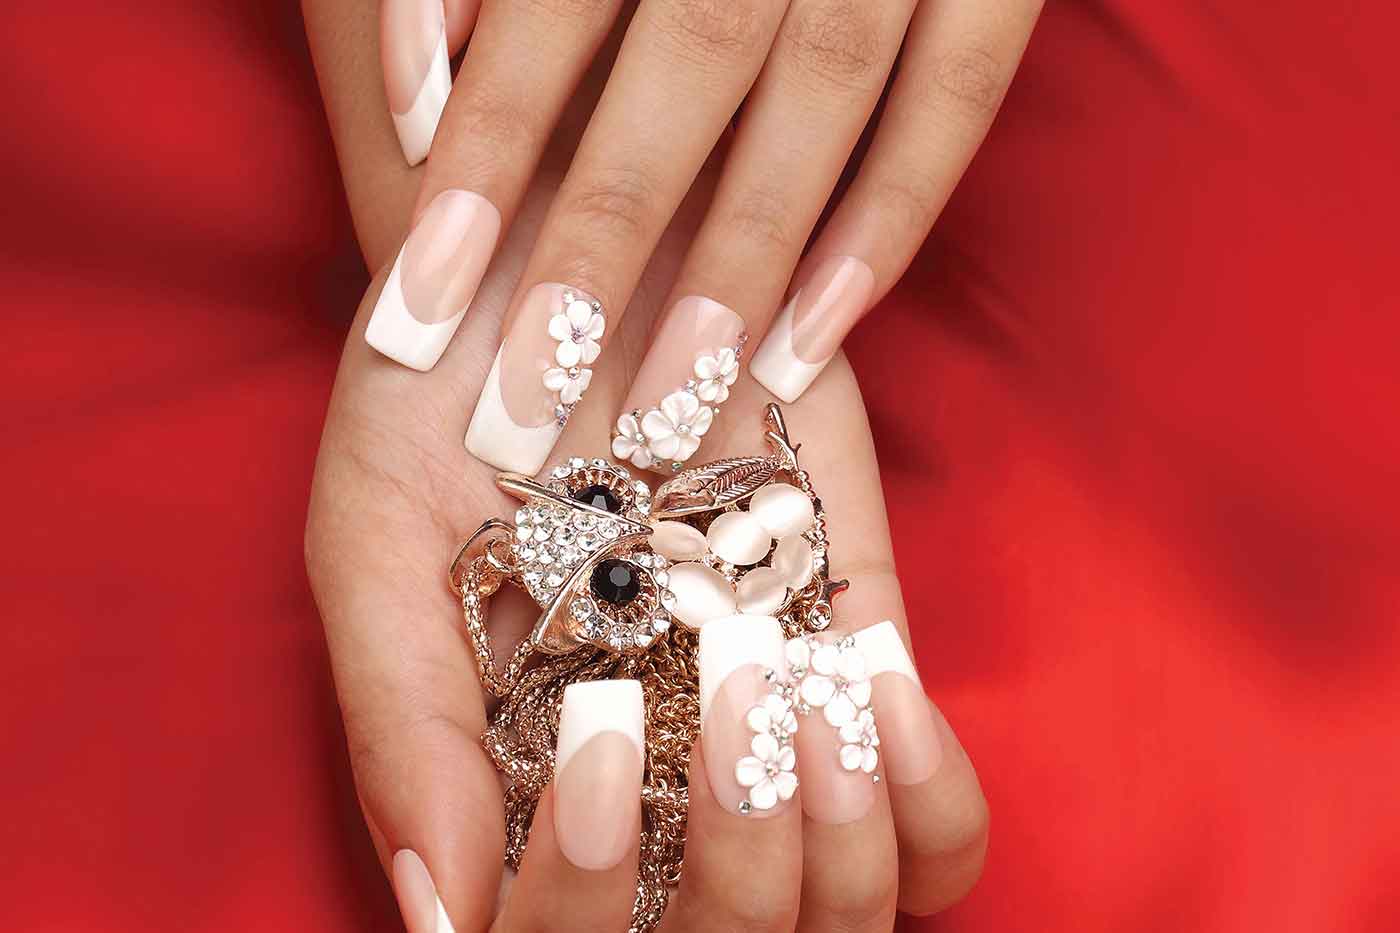 Brides Check Out These Nail Art Designs For Your Upcoming Wedding |  WeddingBazaar